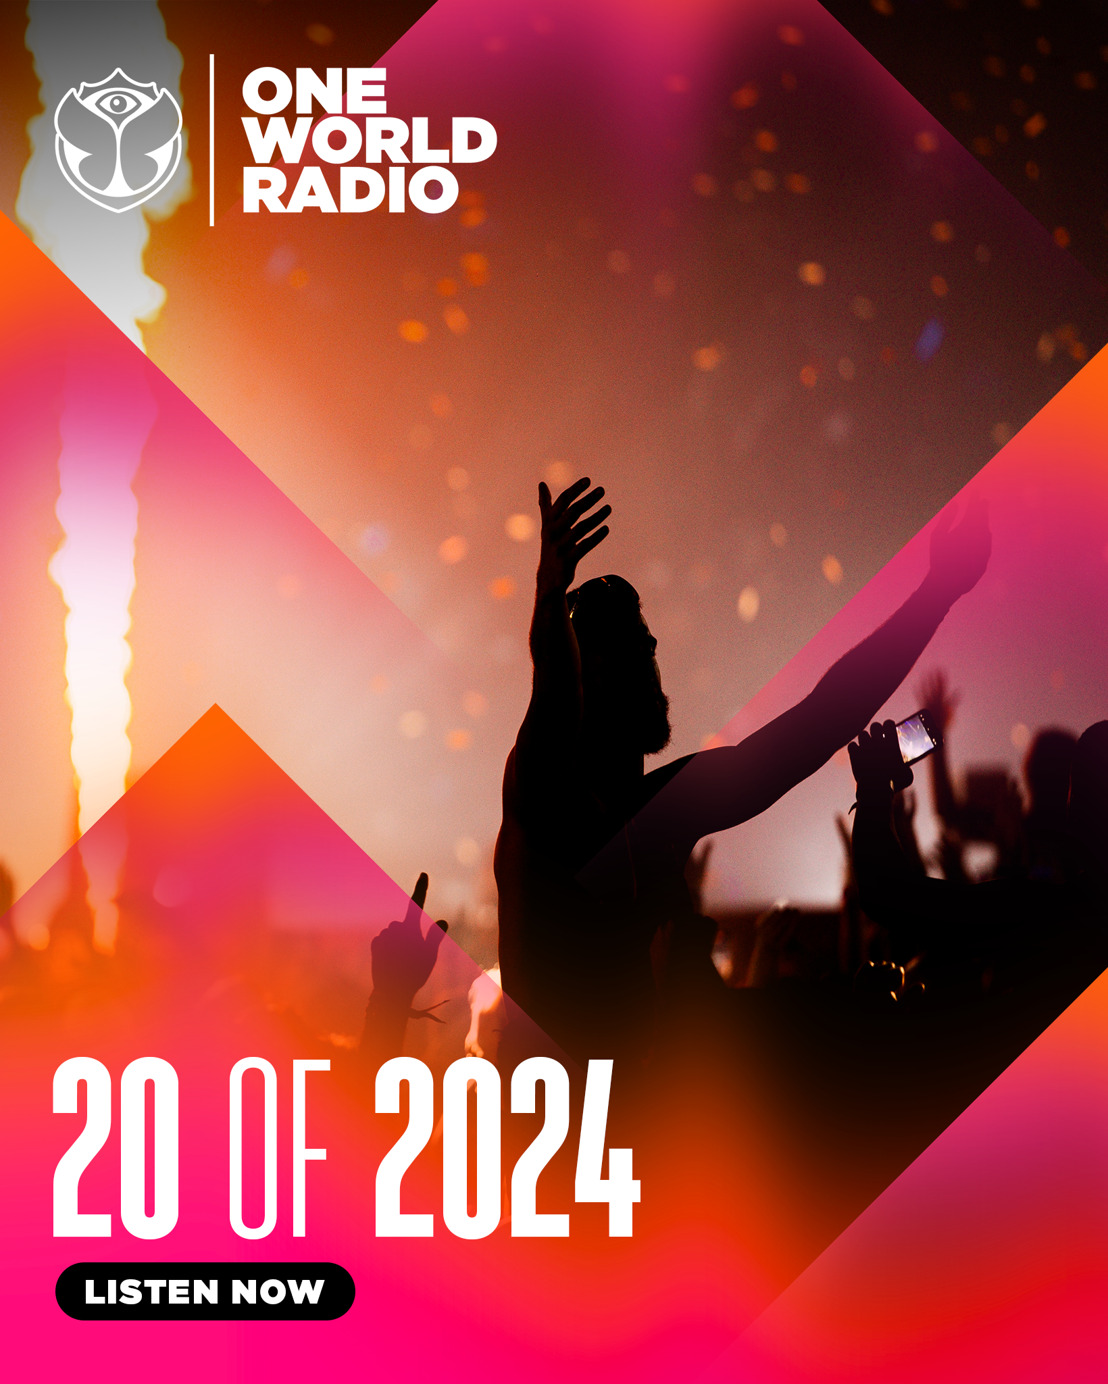 Tomorrowland and One World Radio reveal The 20 of 2024